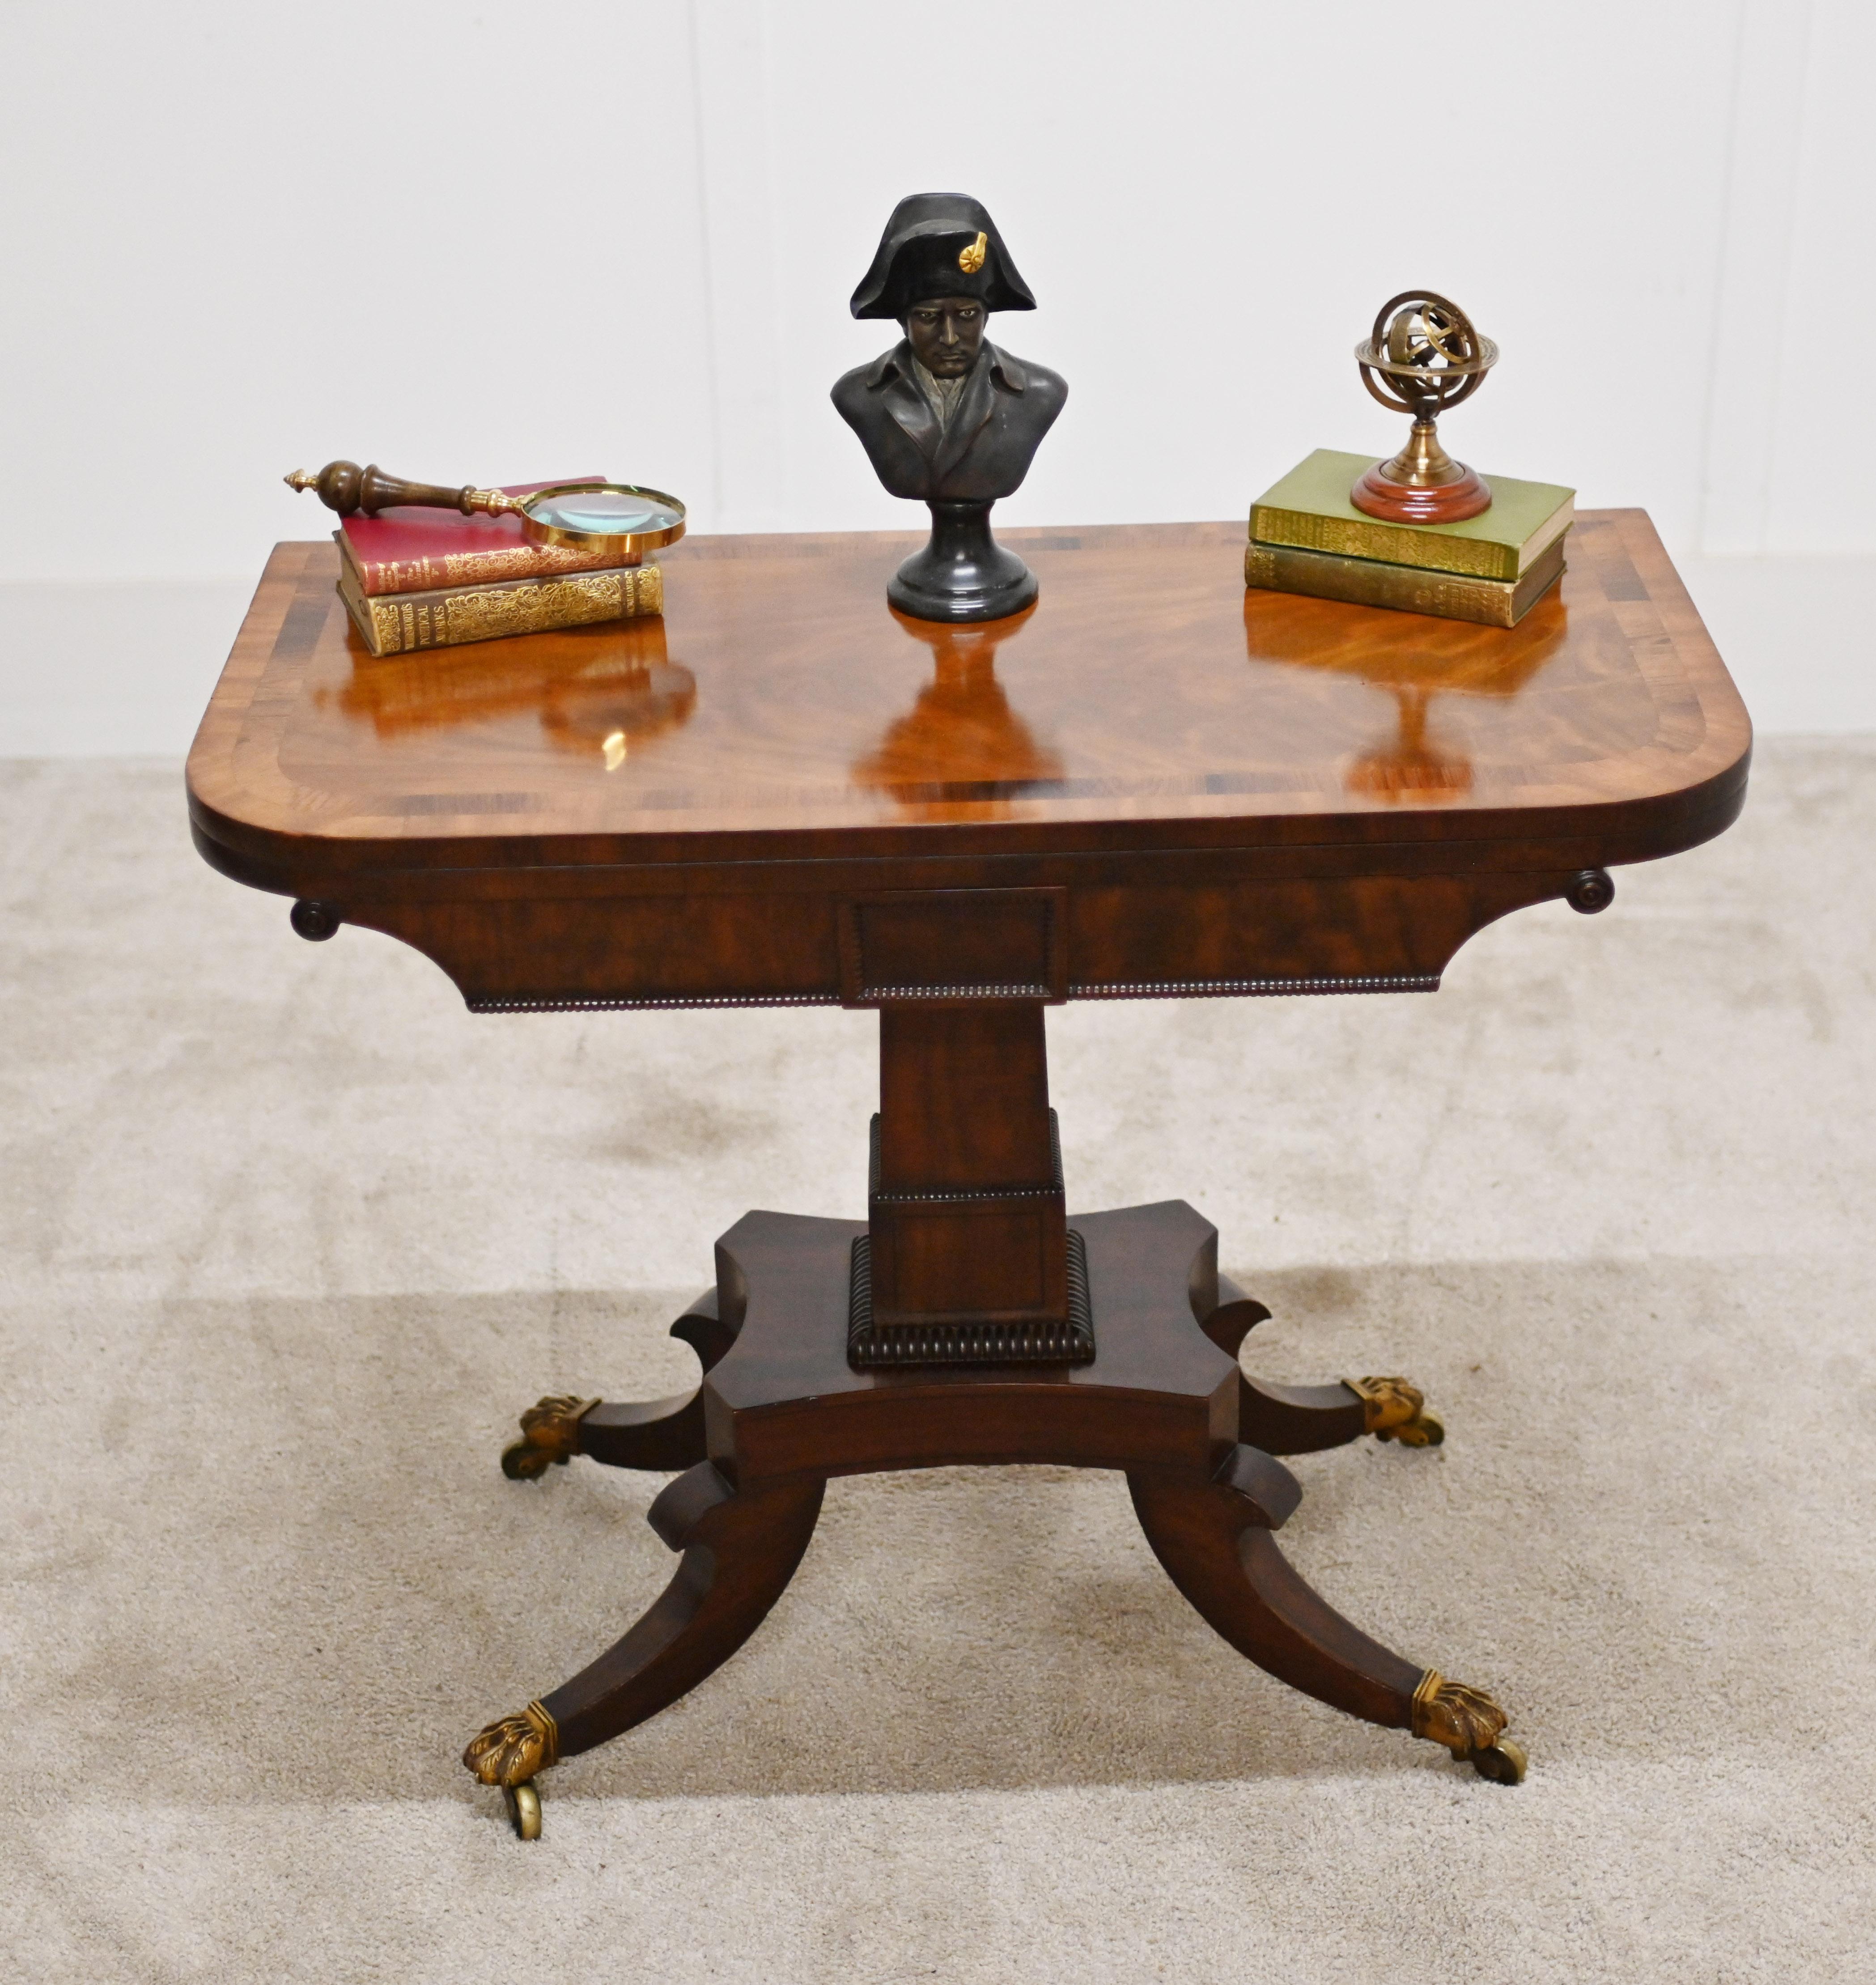 A gorgeous Regency mahogany card table crossbanded supported on splay legs terminating in brass claw feet
Circa 1810
Top opens up to reveal red baize playing surface
Bought from a private residence in London's Mayfair
Offered in great condition